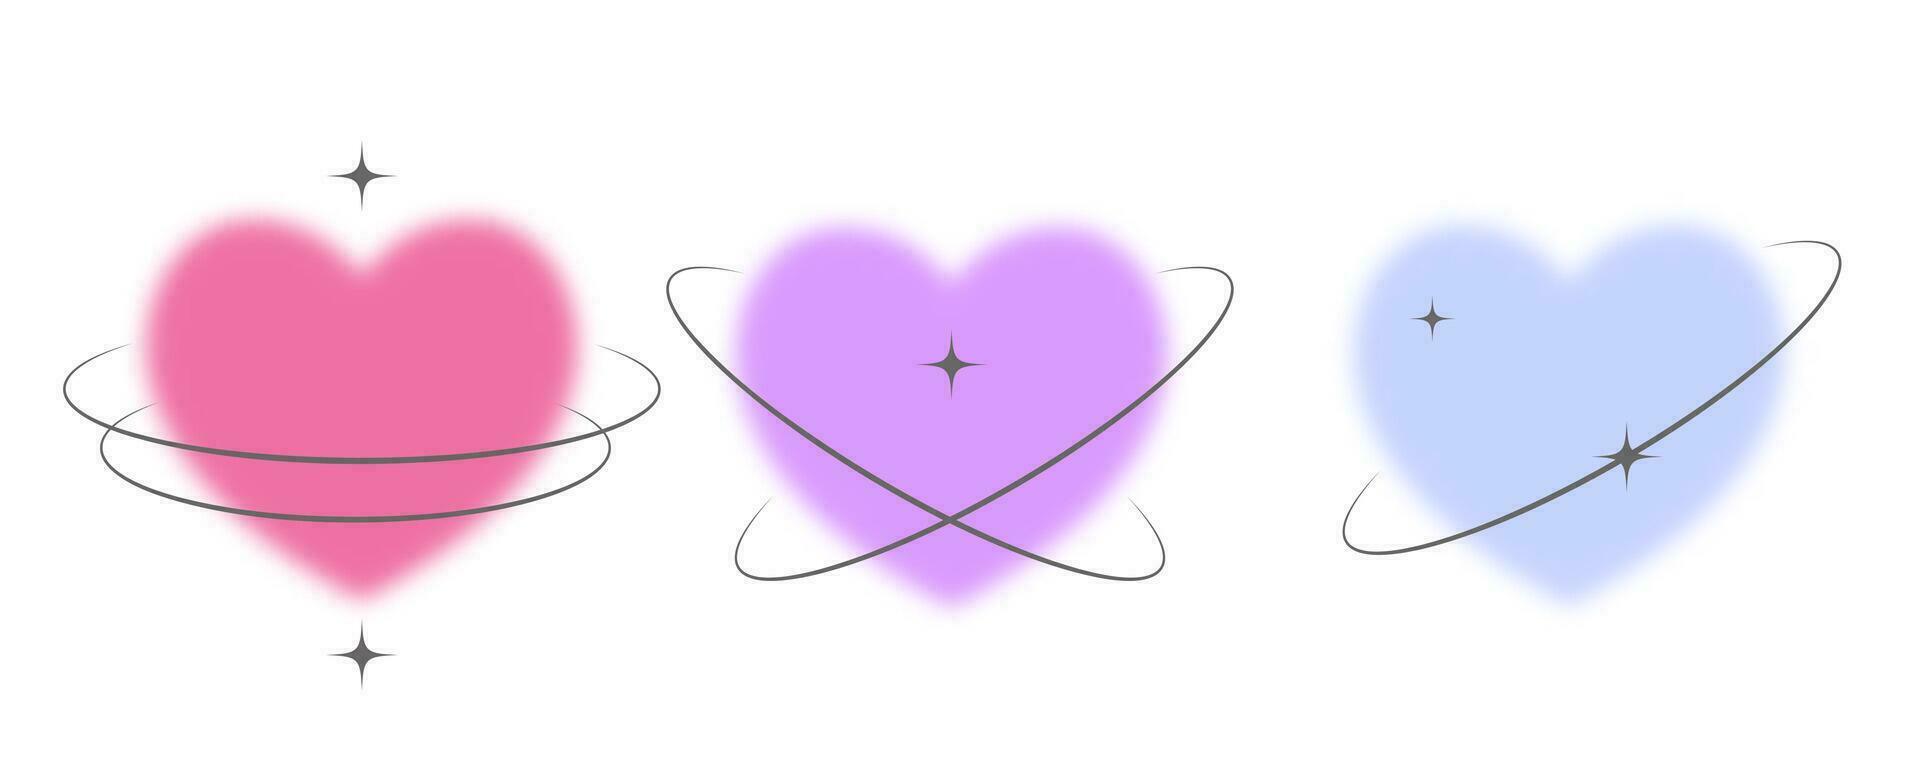 Y2k blurred heart. Gradient aesthetic sticker with stars on orbits. Soft glow effect with aura. Cute smooth futuristic vector collection